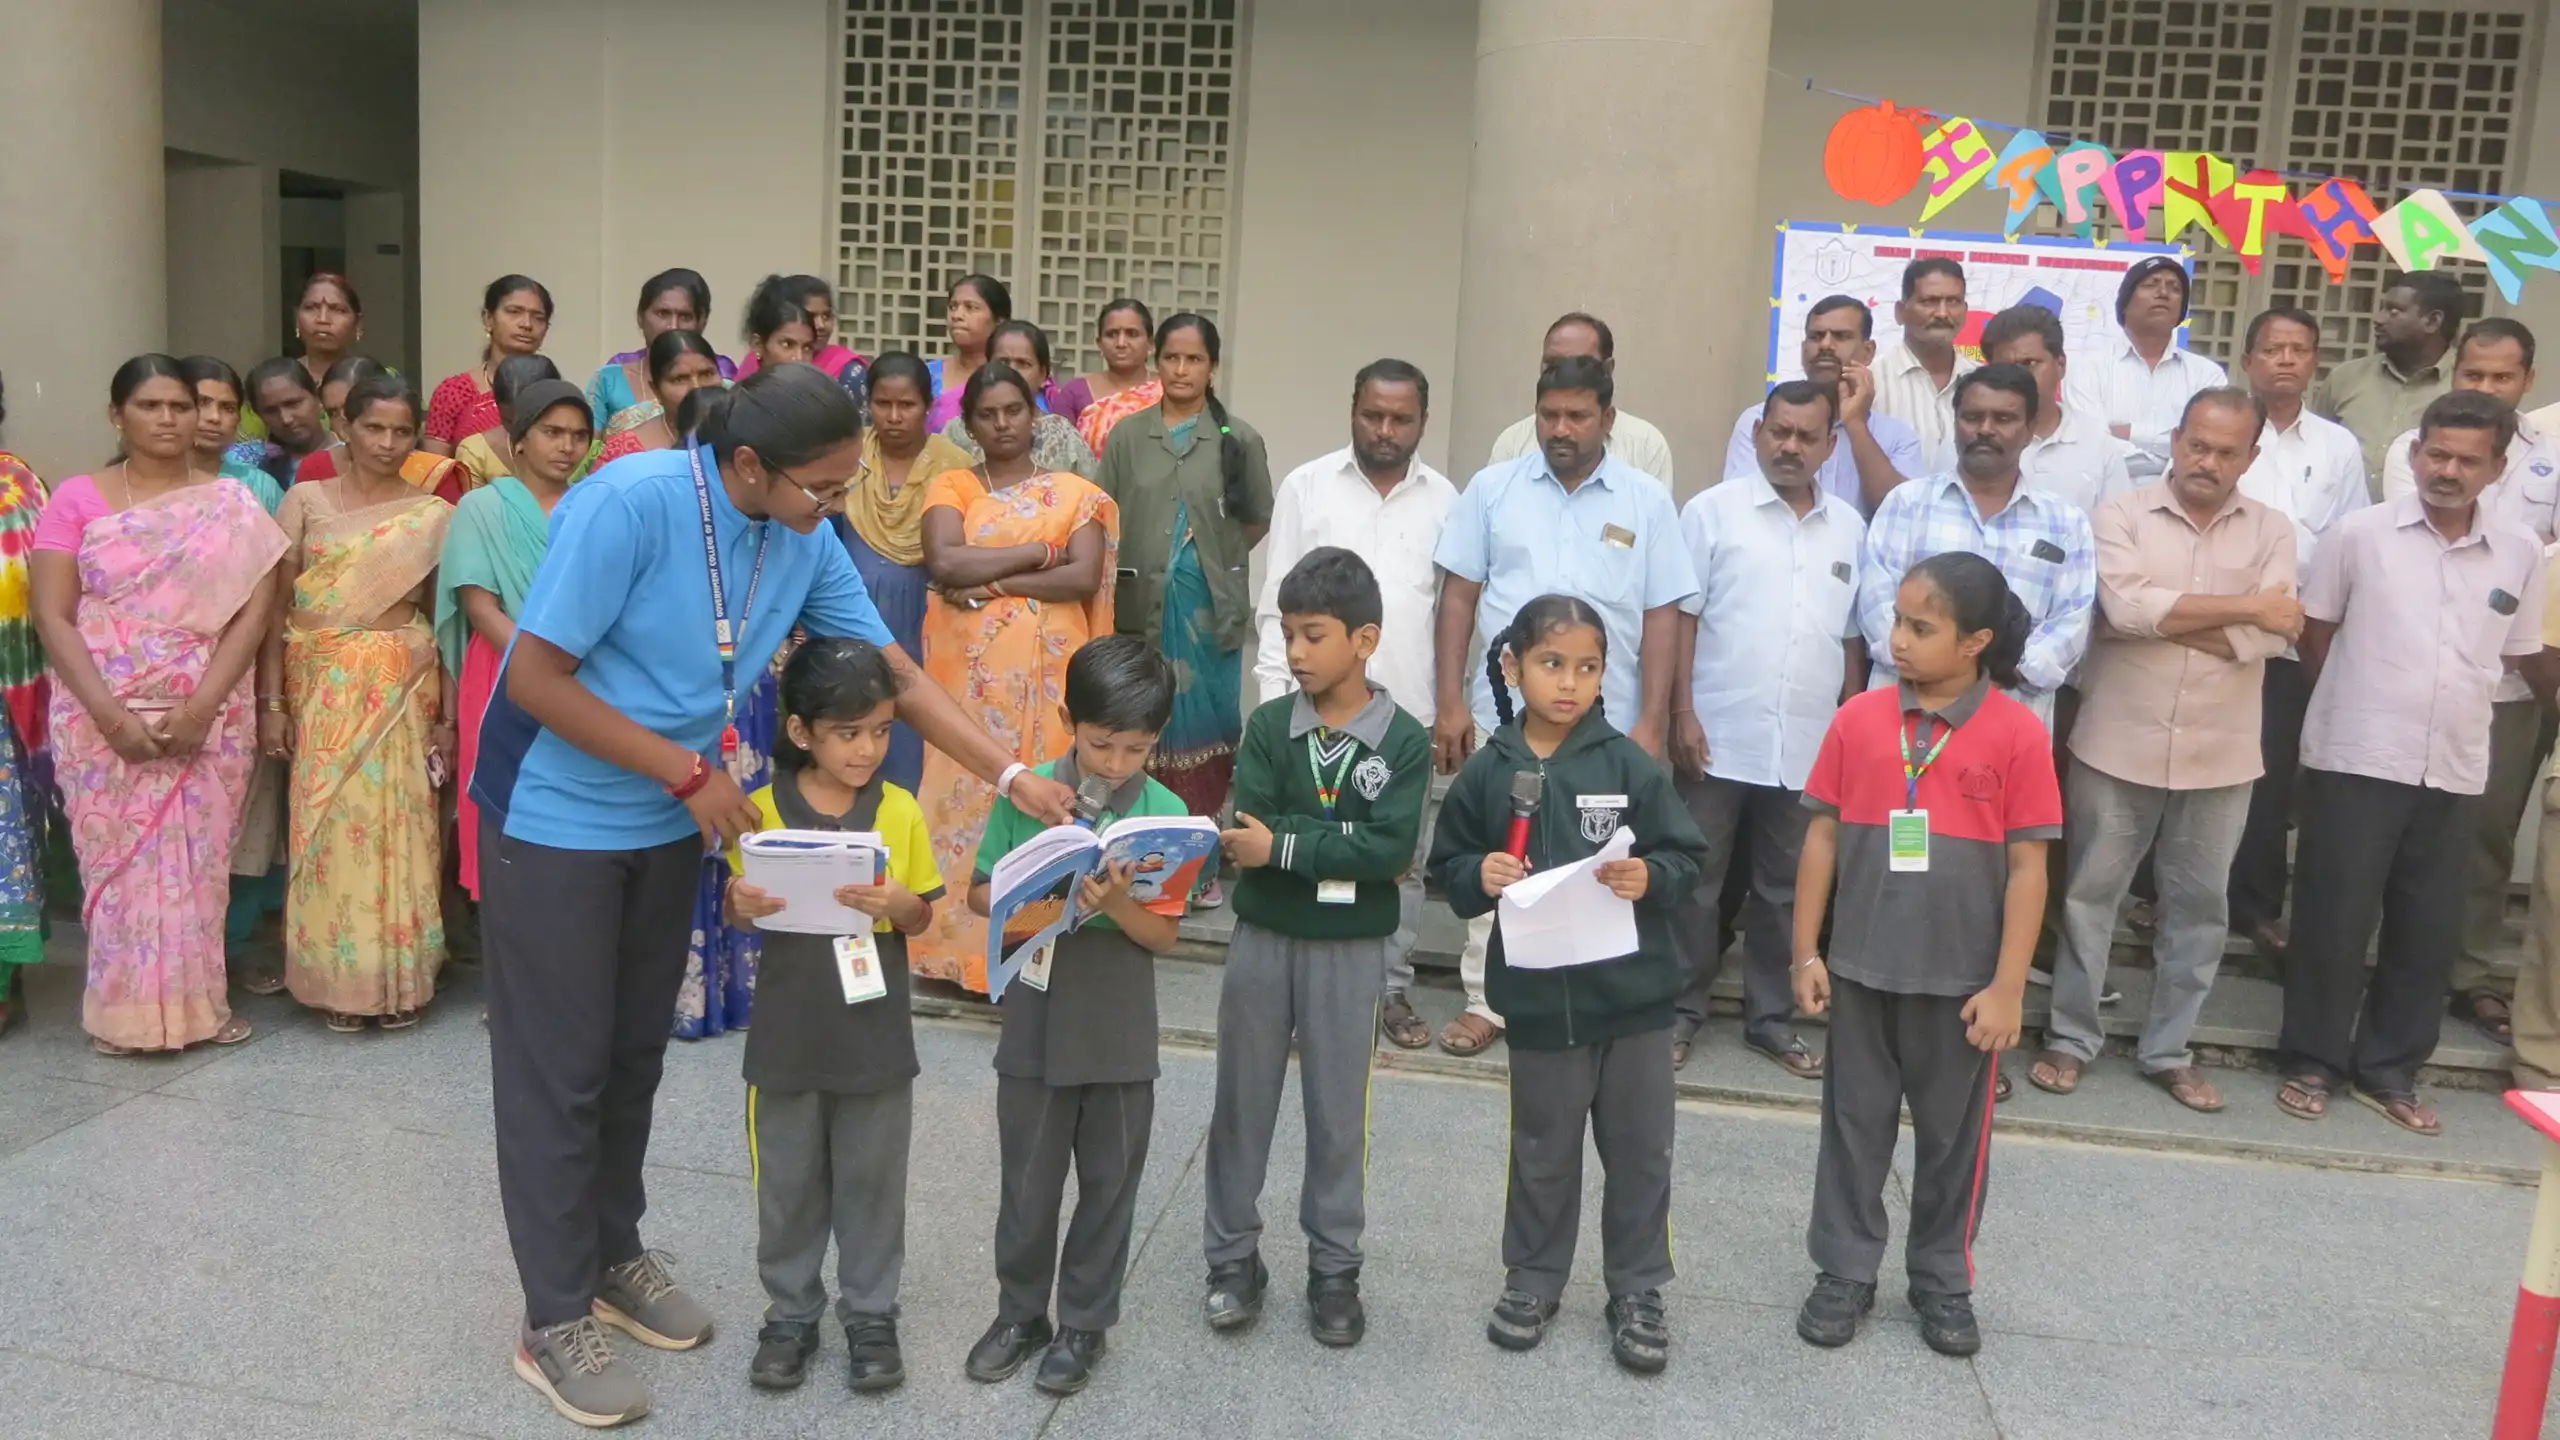 Students of DPS Warangal reading books and teacher assisting them during morning assembly.